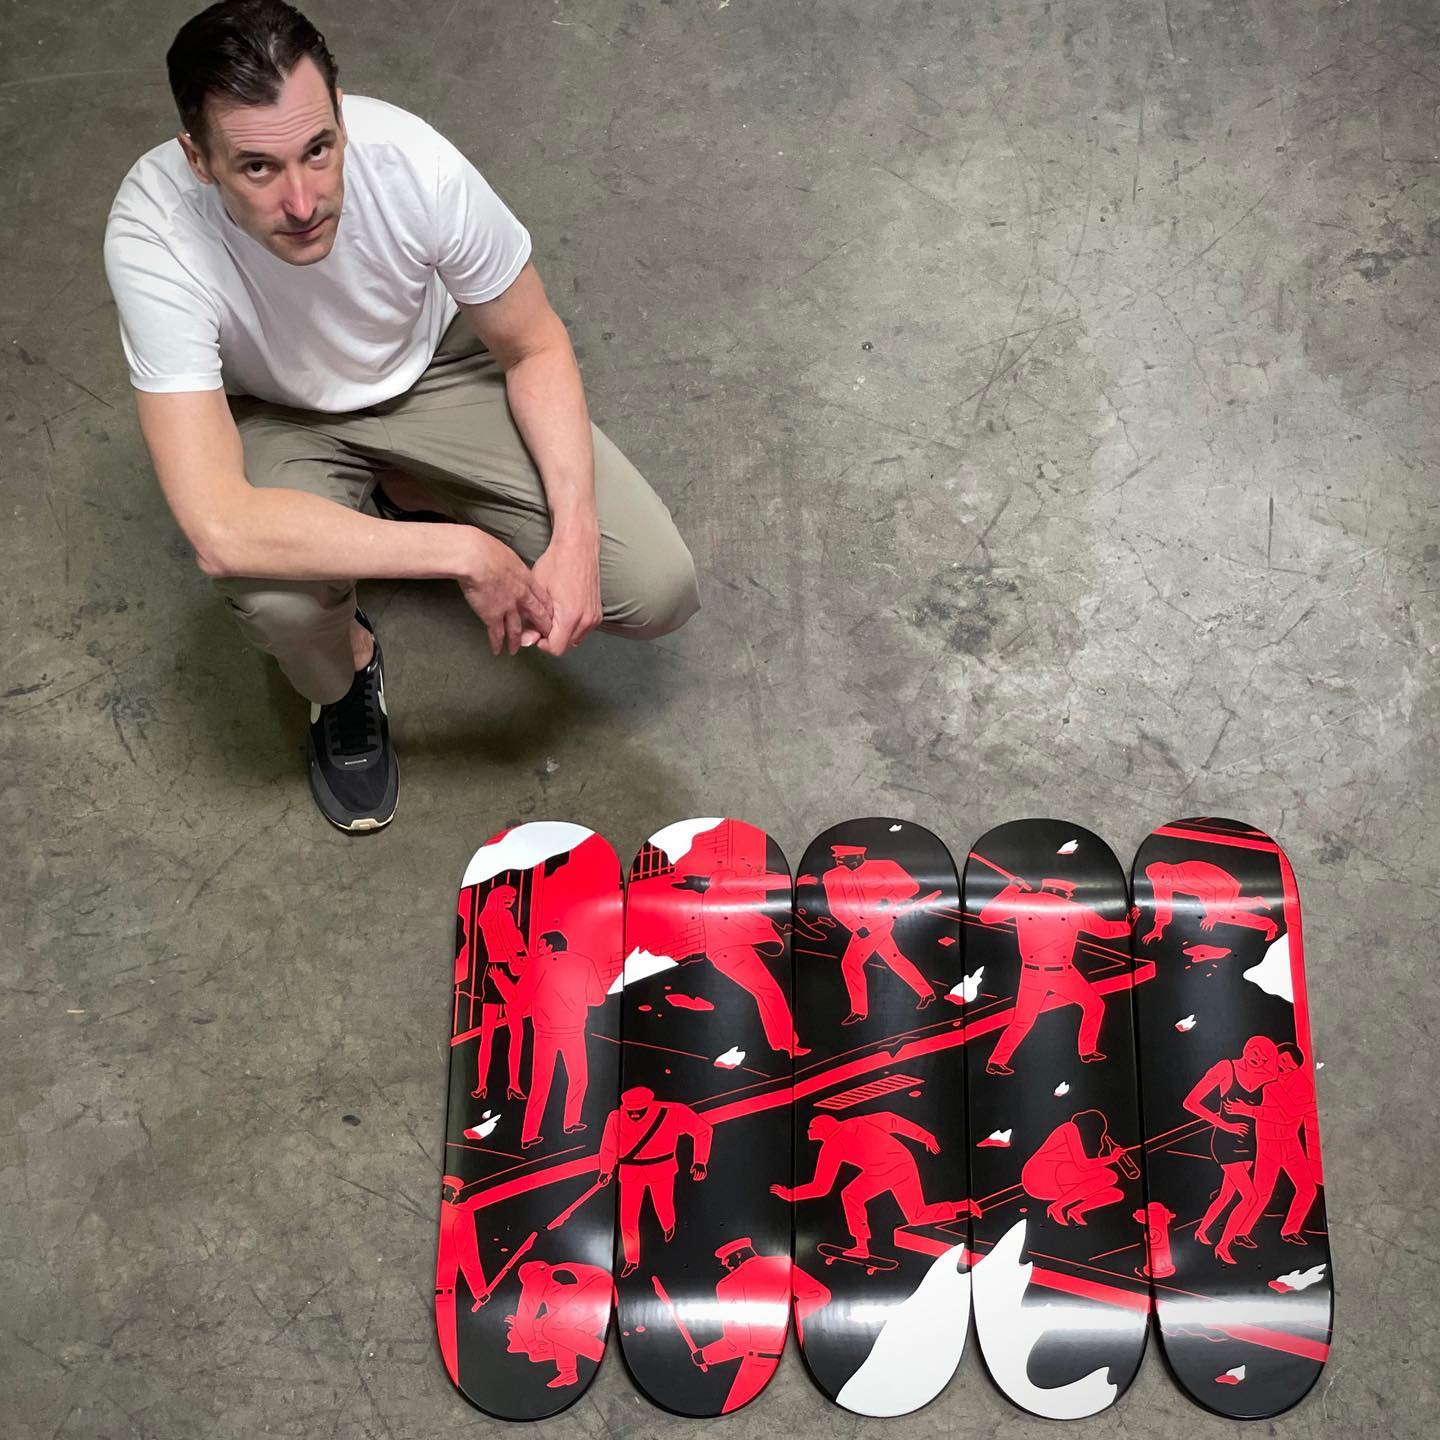 Rule Of Law By Cleon Peterson X Zero Skateboards 3